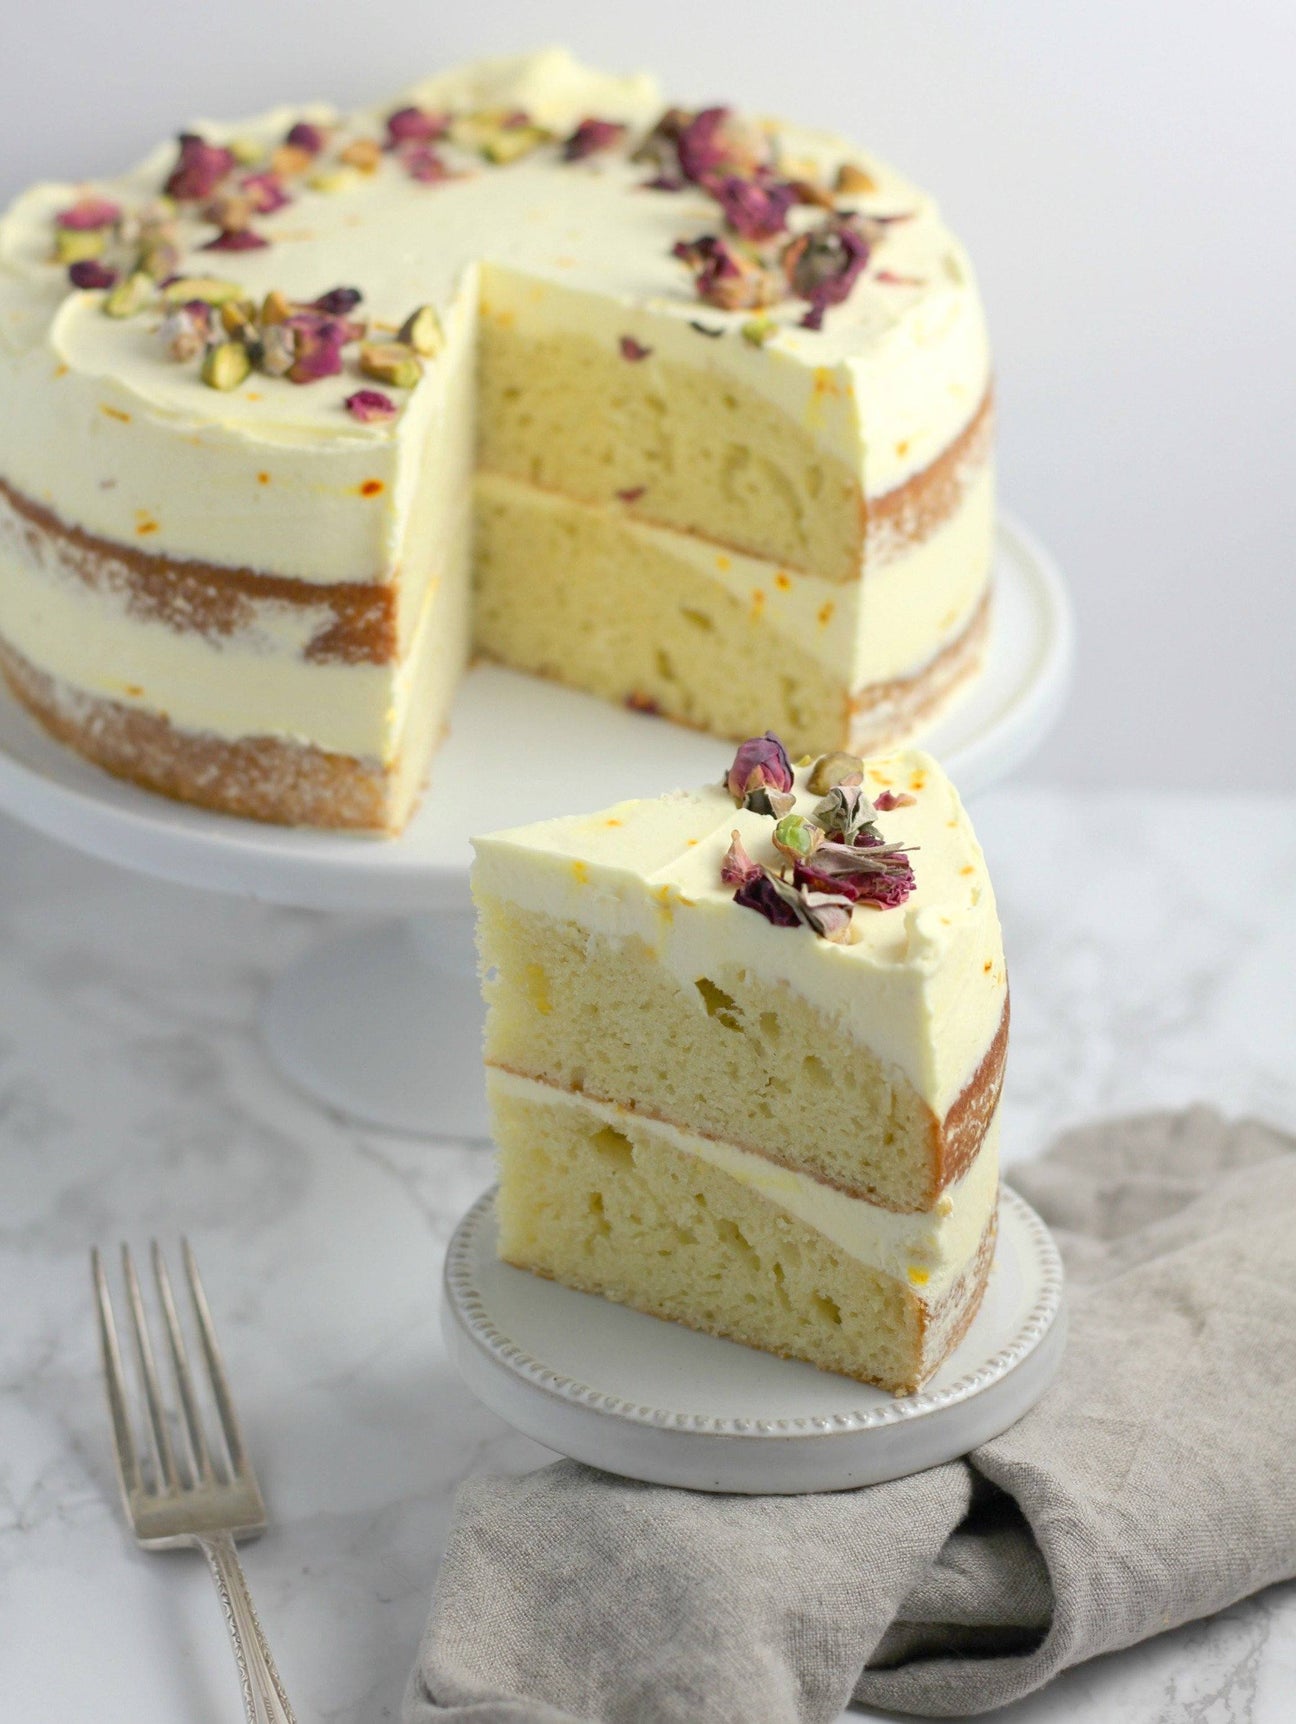 Olive Oil Cake with Saffron Frosting (Rose Petals and Pistachio)